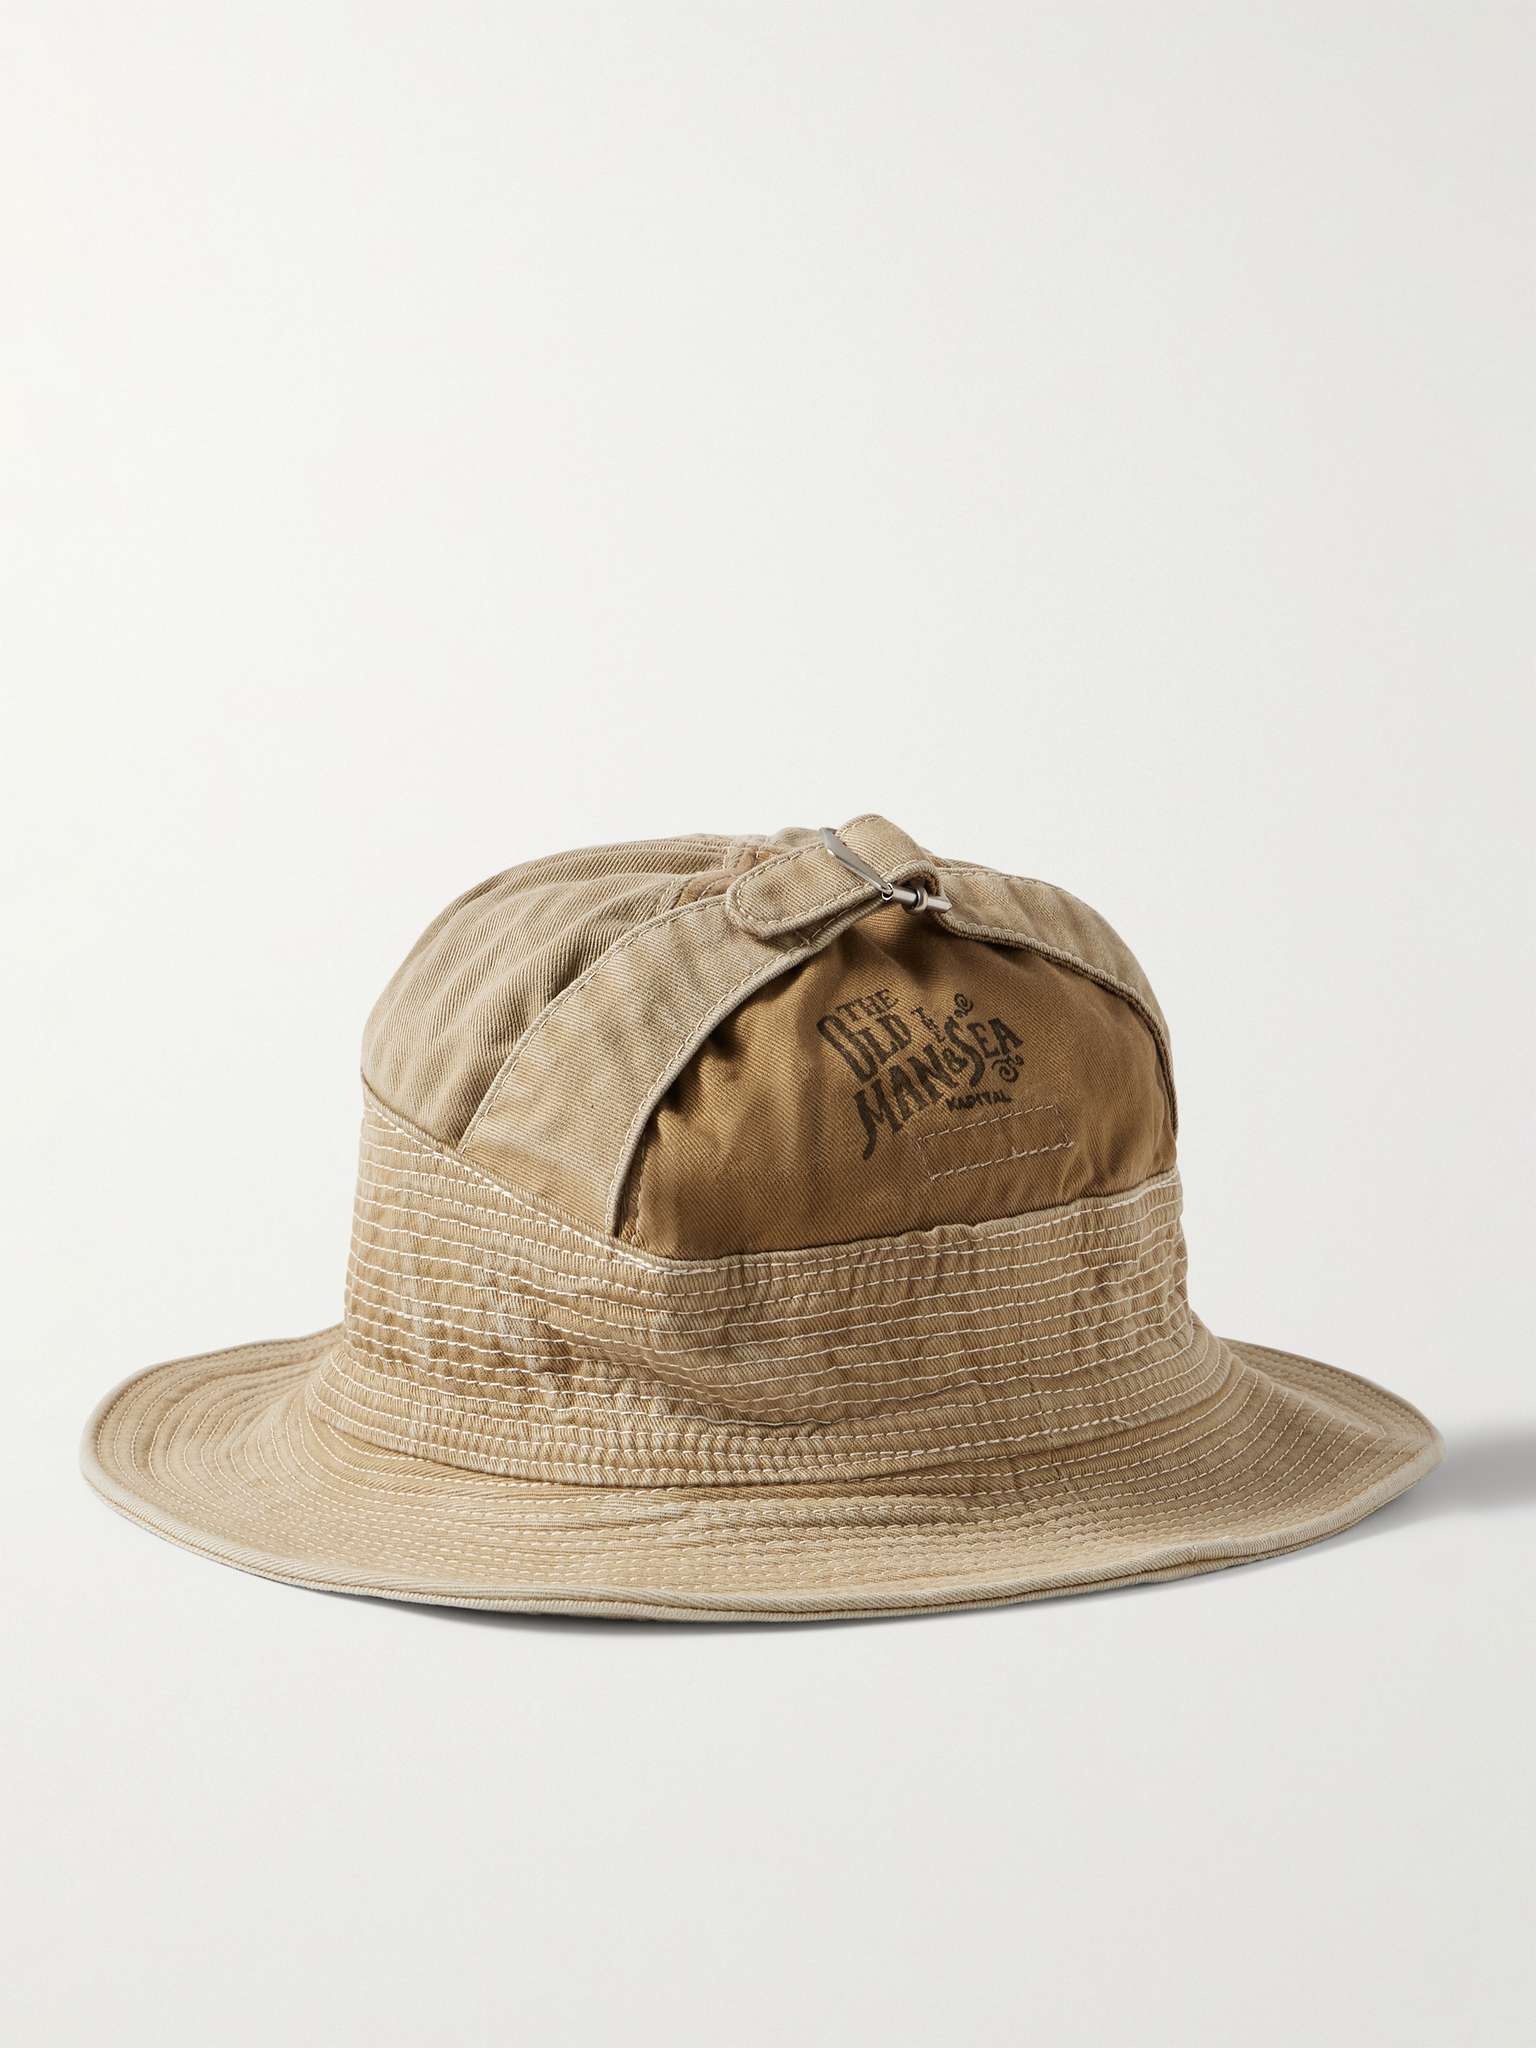 The Old Man and the Sea Distressed Buckled Cotton-Twill Bucket Hat